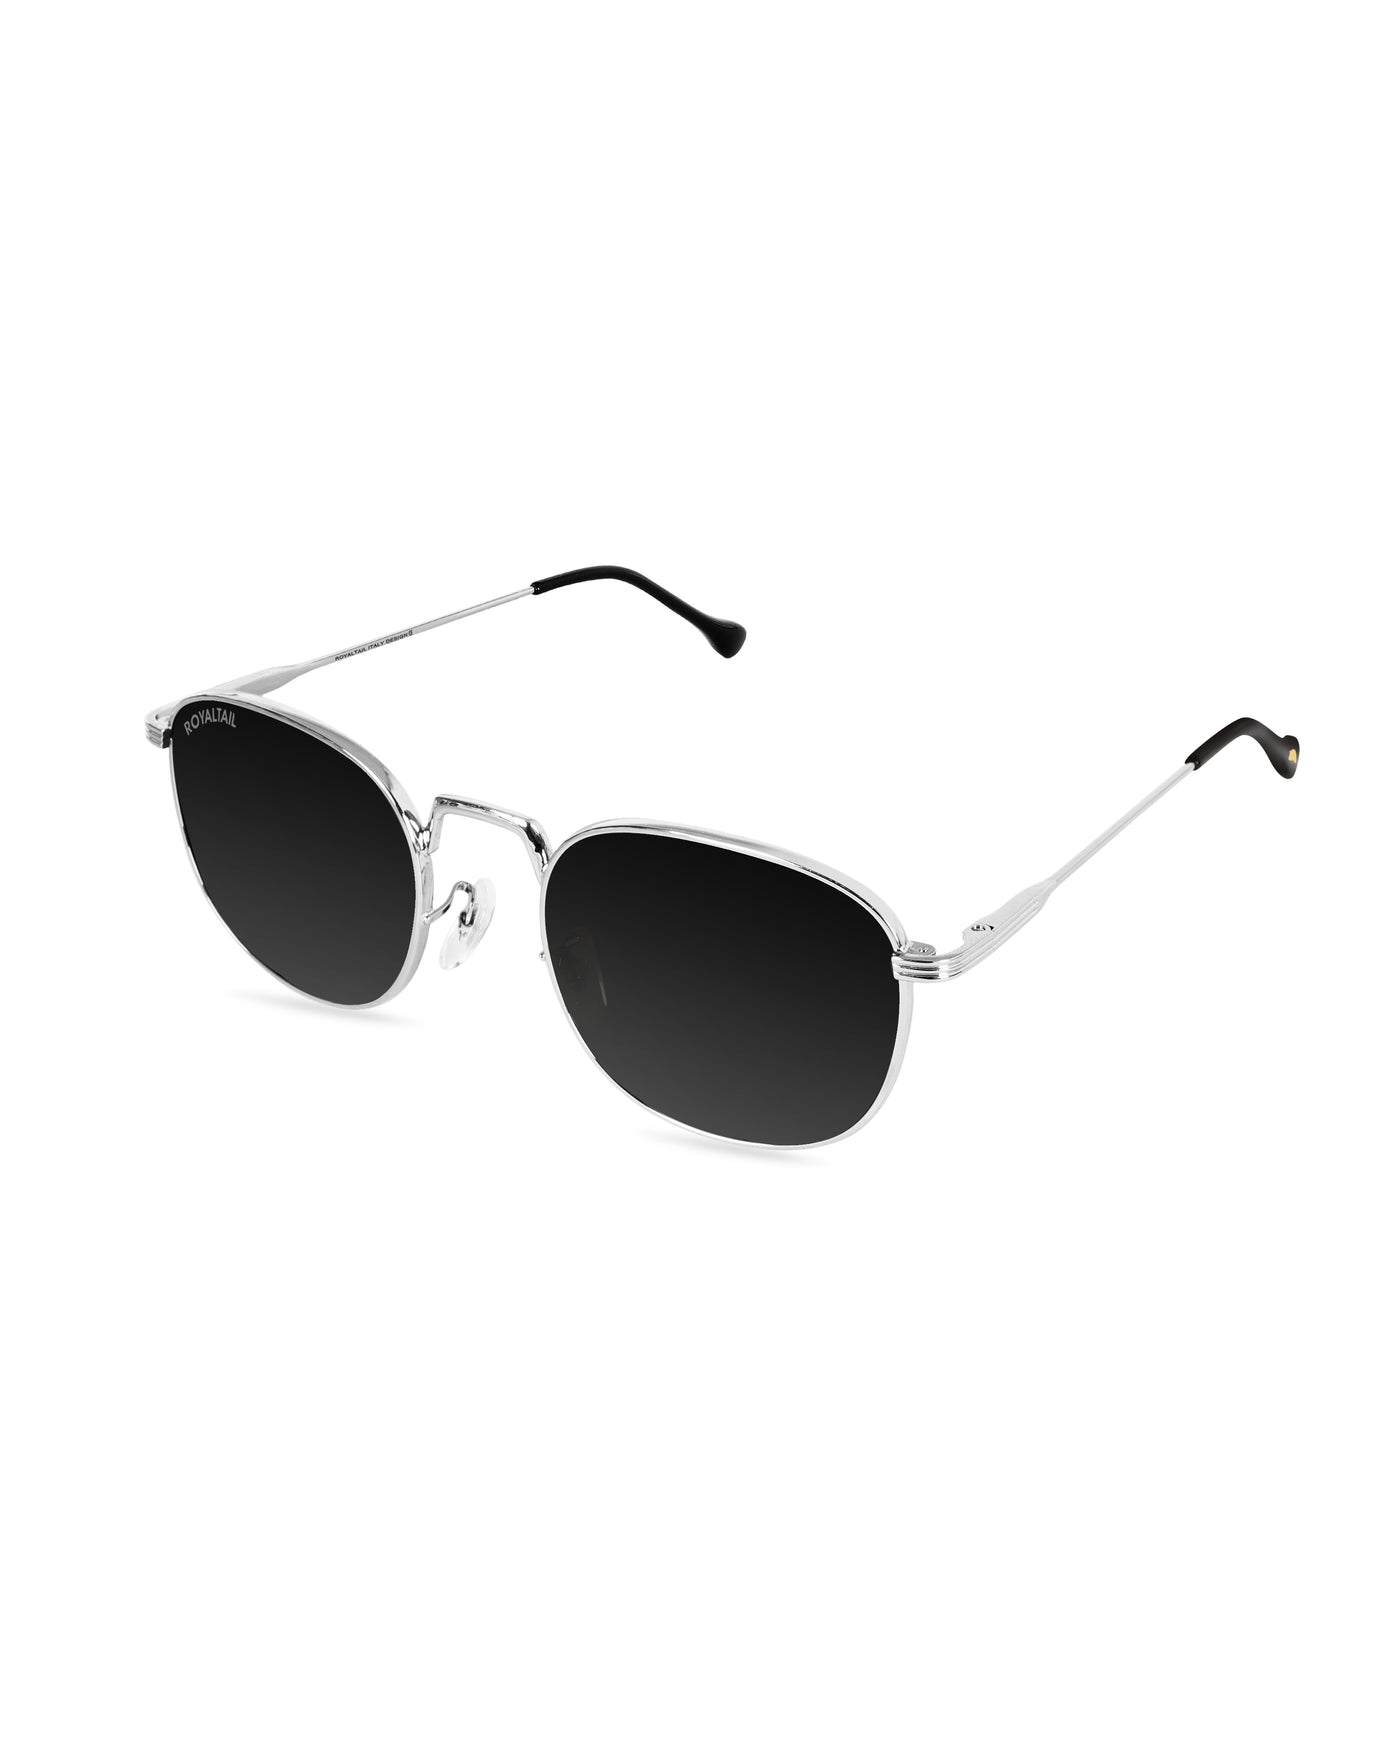 Black Glass and Silver Frame Round Medford Series Polarized Sunglasses - Royaltail